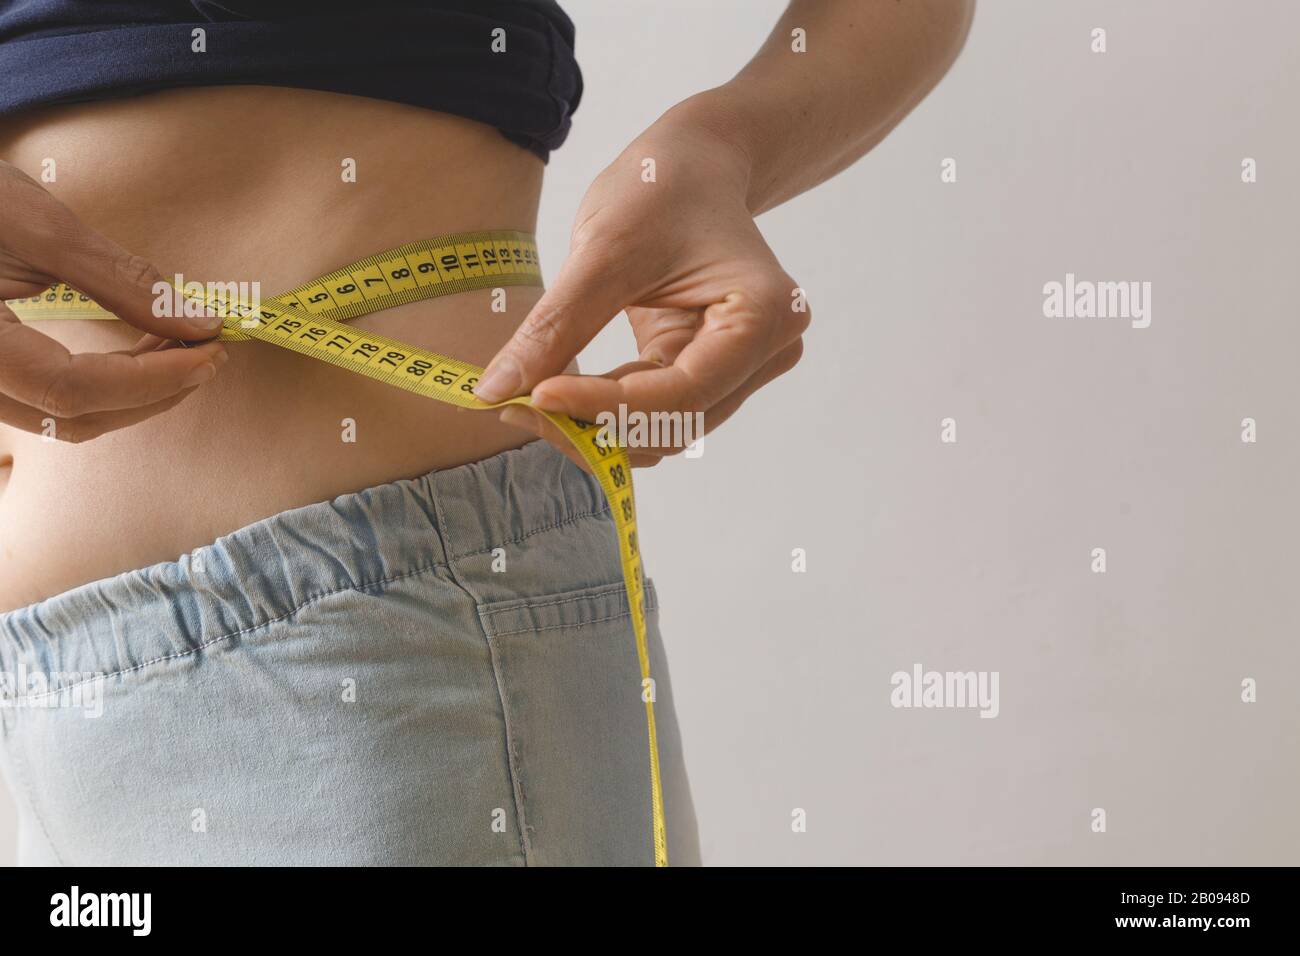 A young woman measures her waist with a measuring tape. The concept of losing weight. Stock Photo